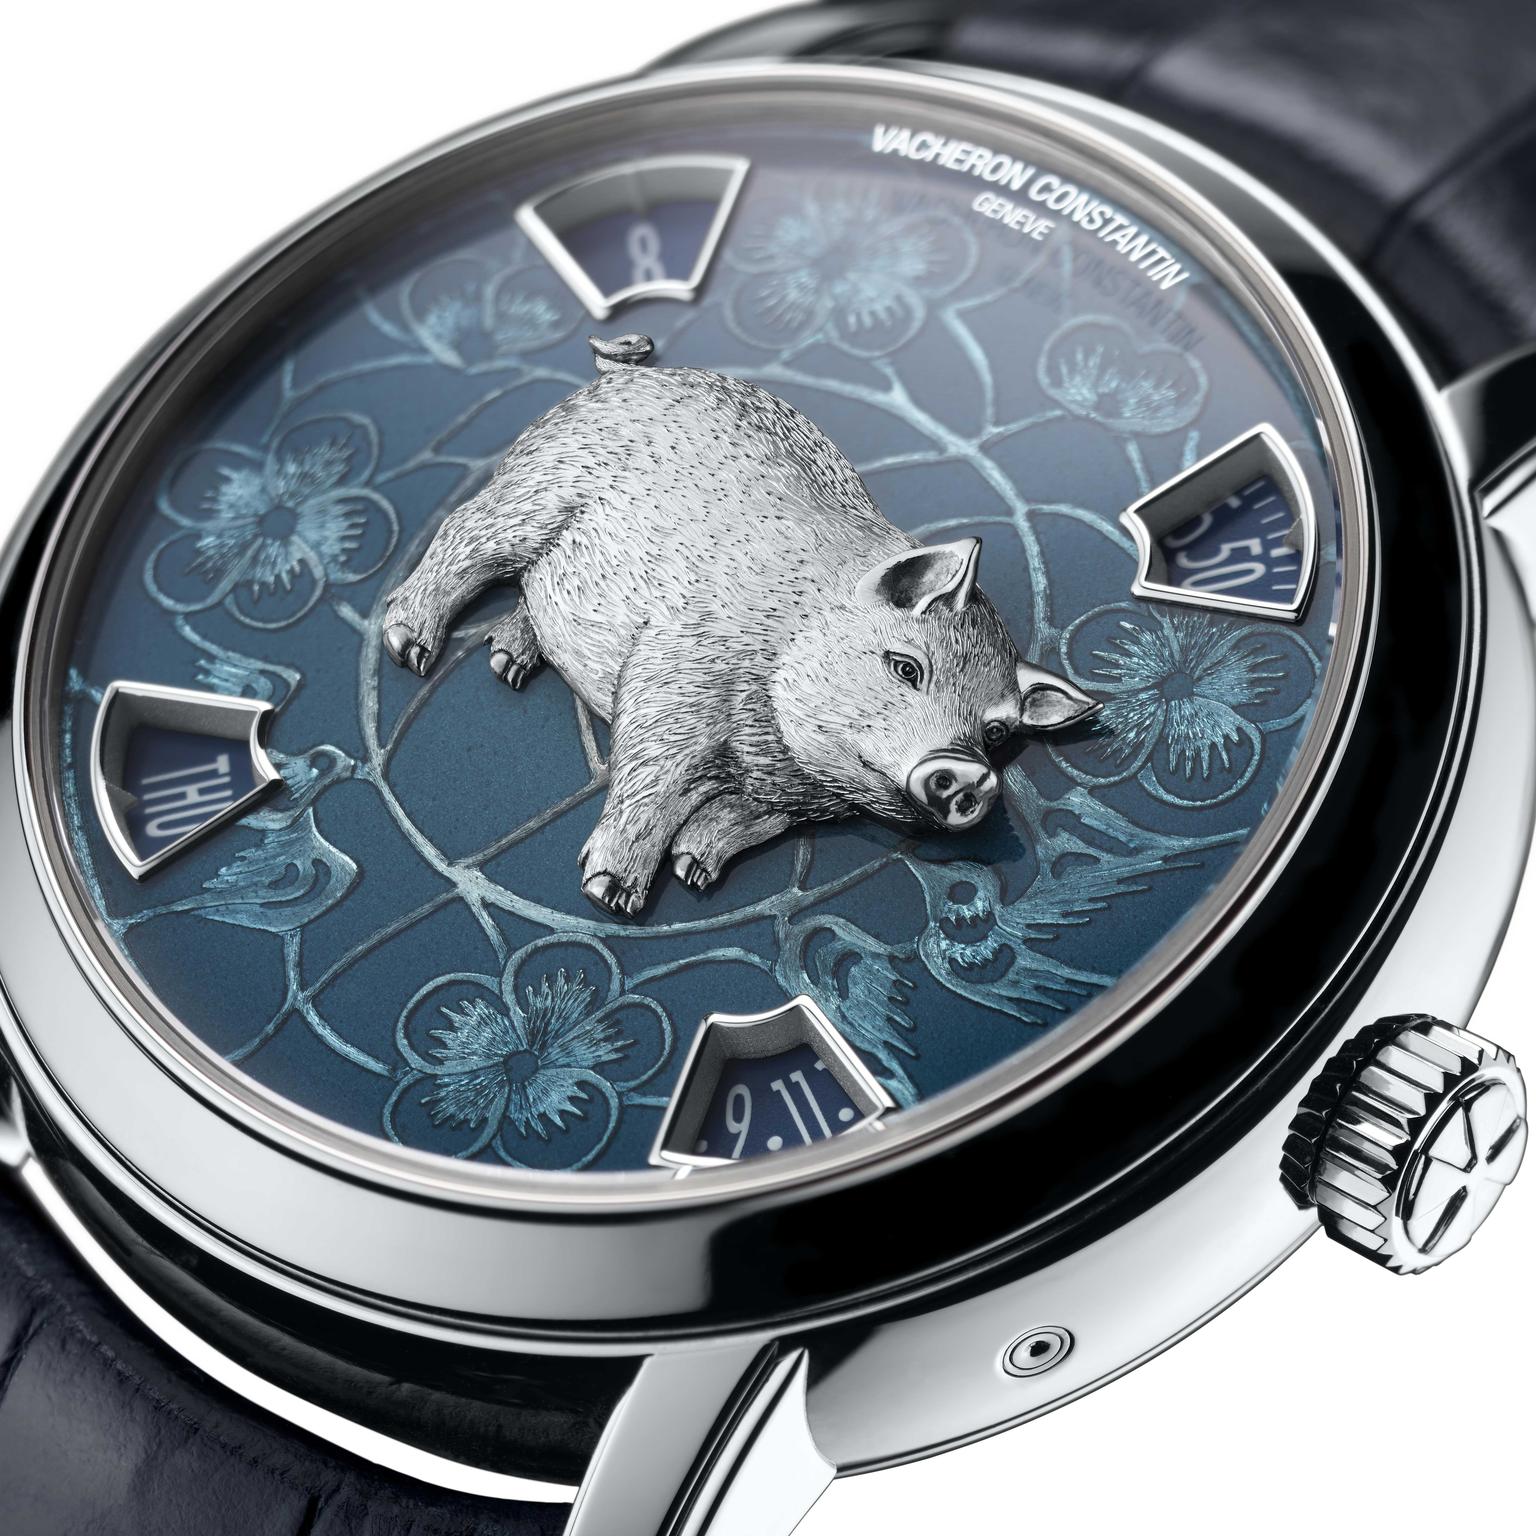 Vacheron Constantin The Legend of the Chinese Zodiac  Year of the Pig platinum version